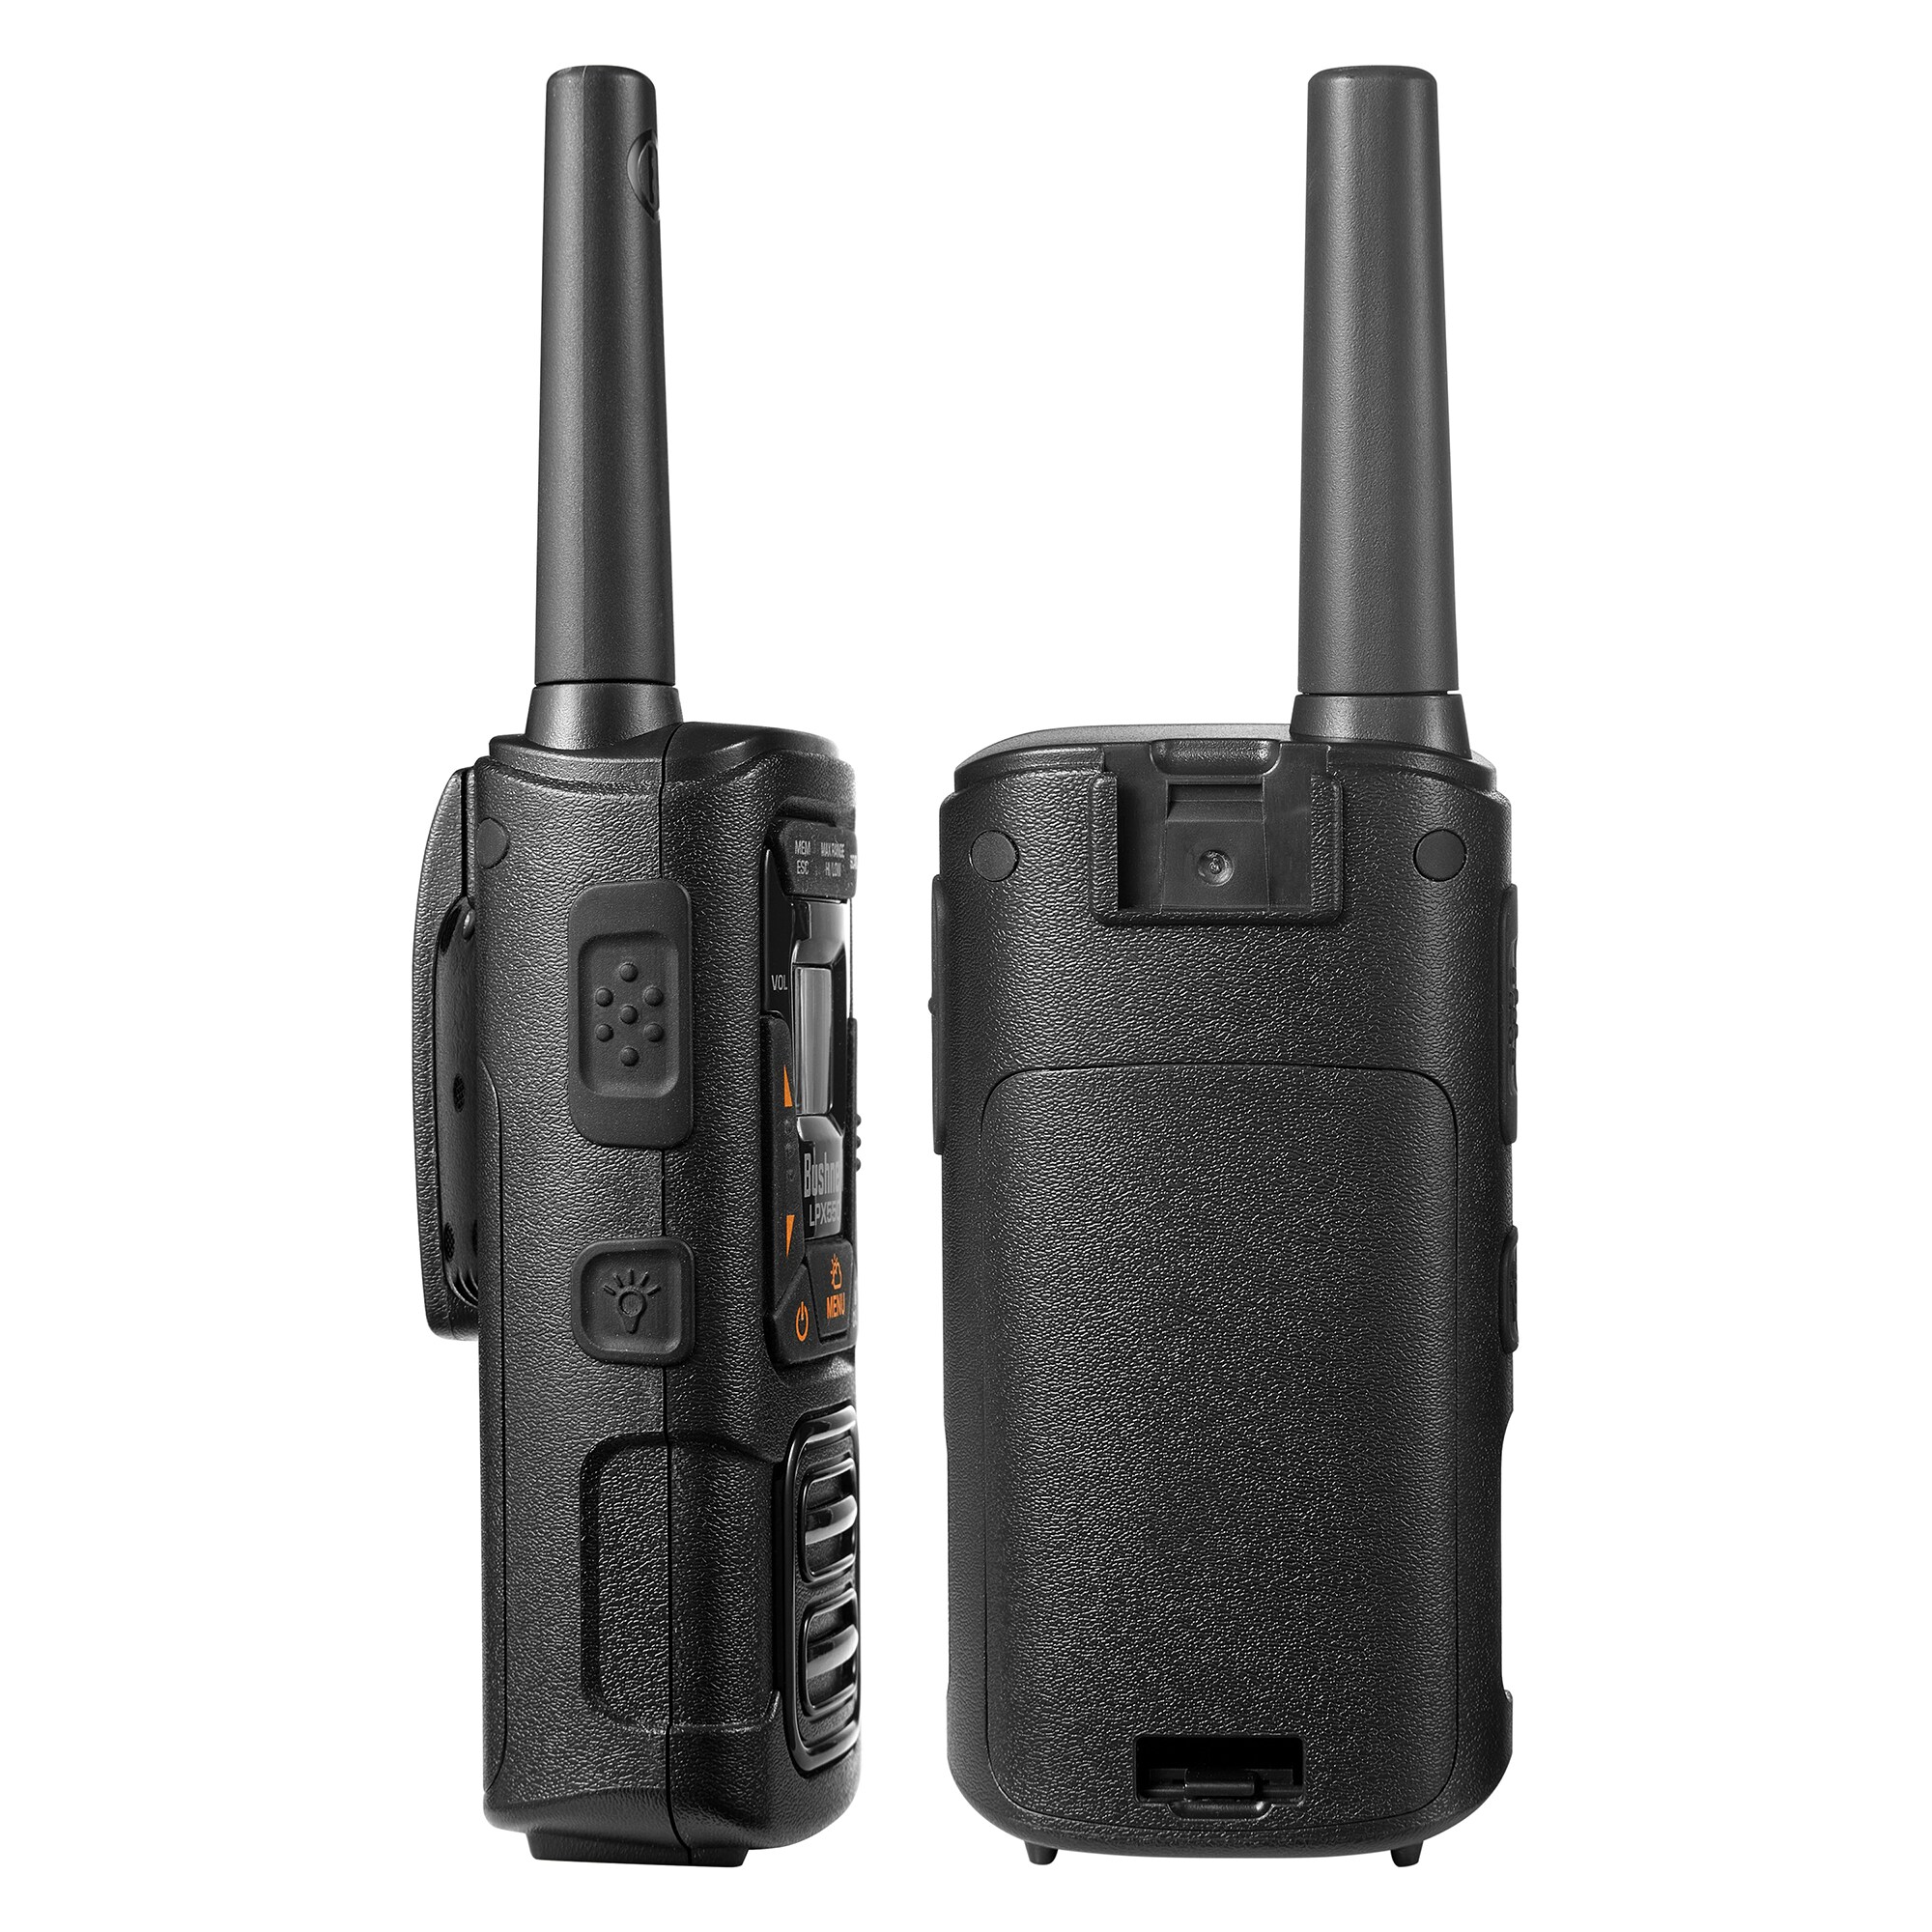 Long Range Walkie Talkie 100 Mile Two Way Radio GMRS Repeater Capable 2  PACK